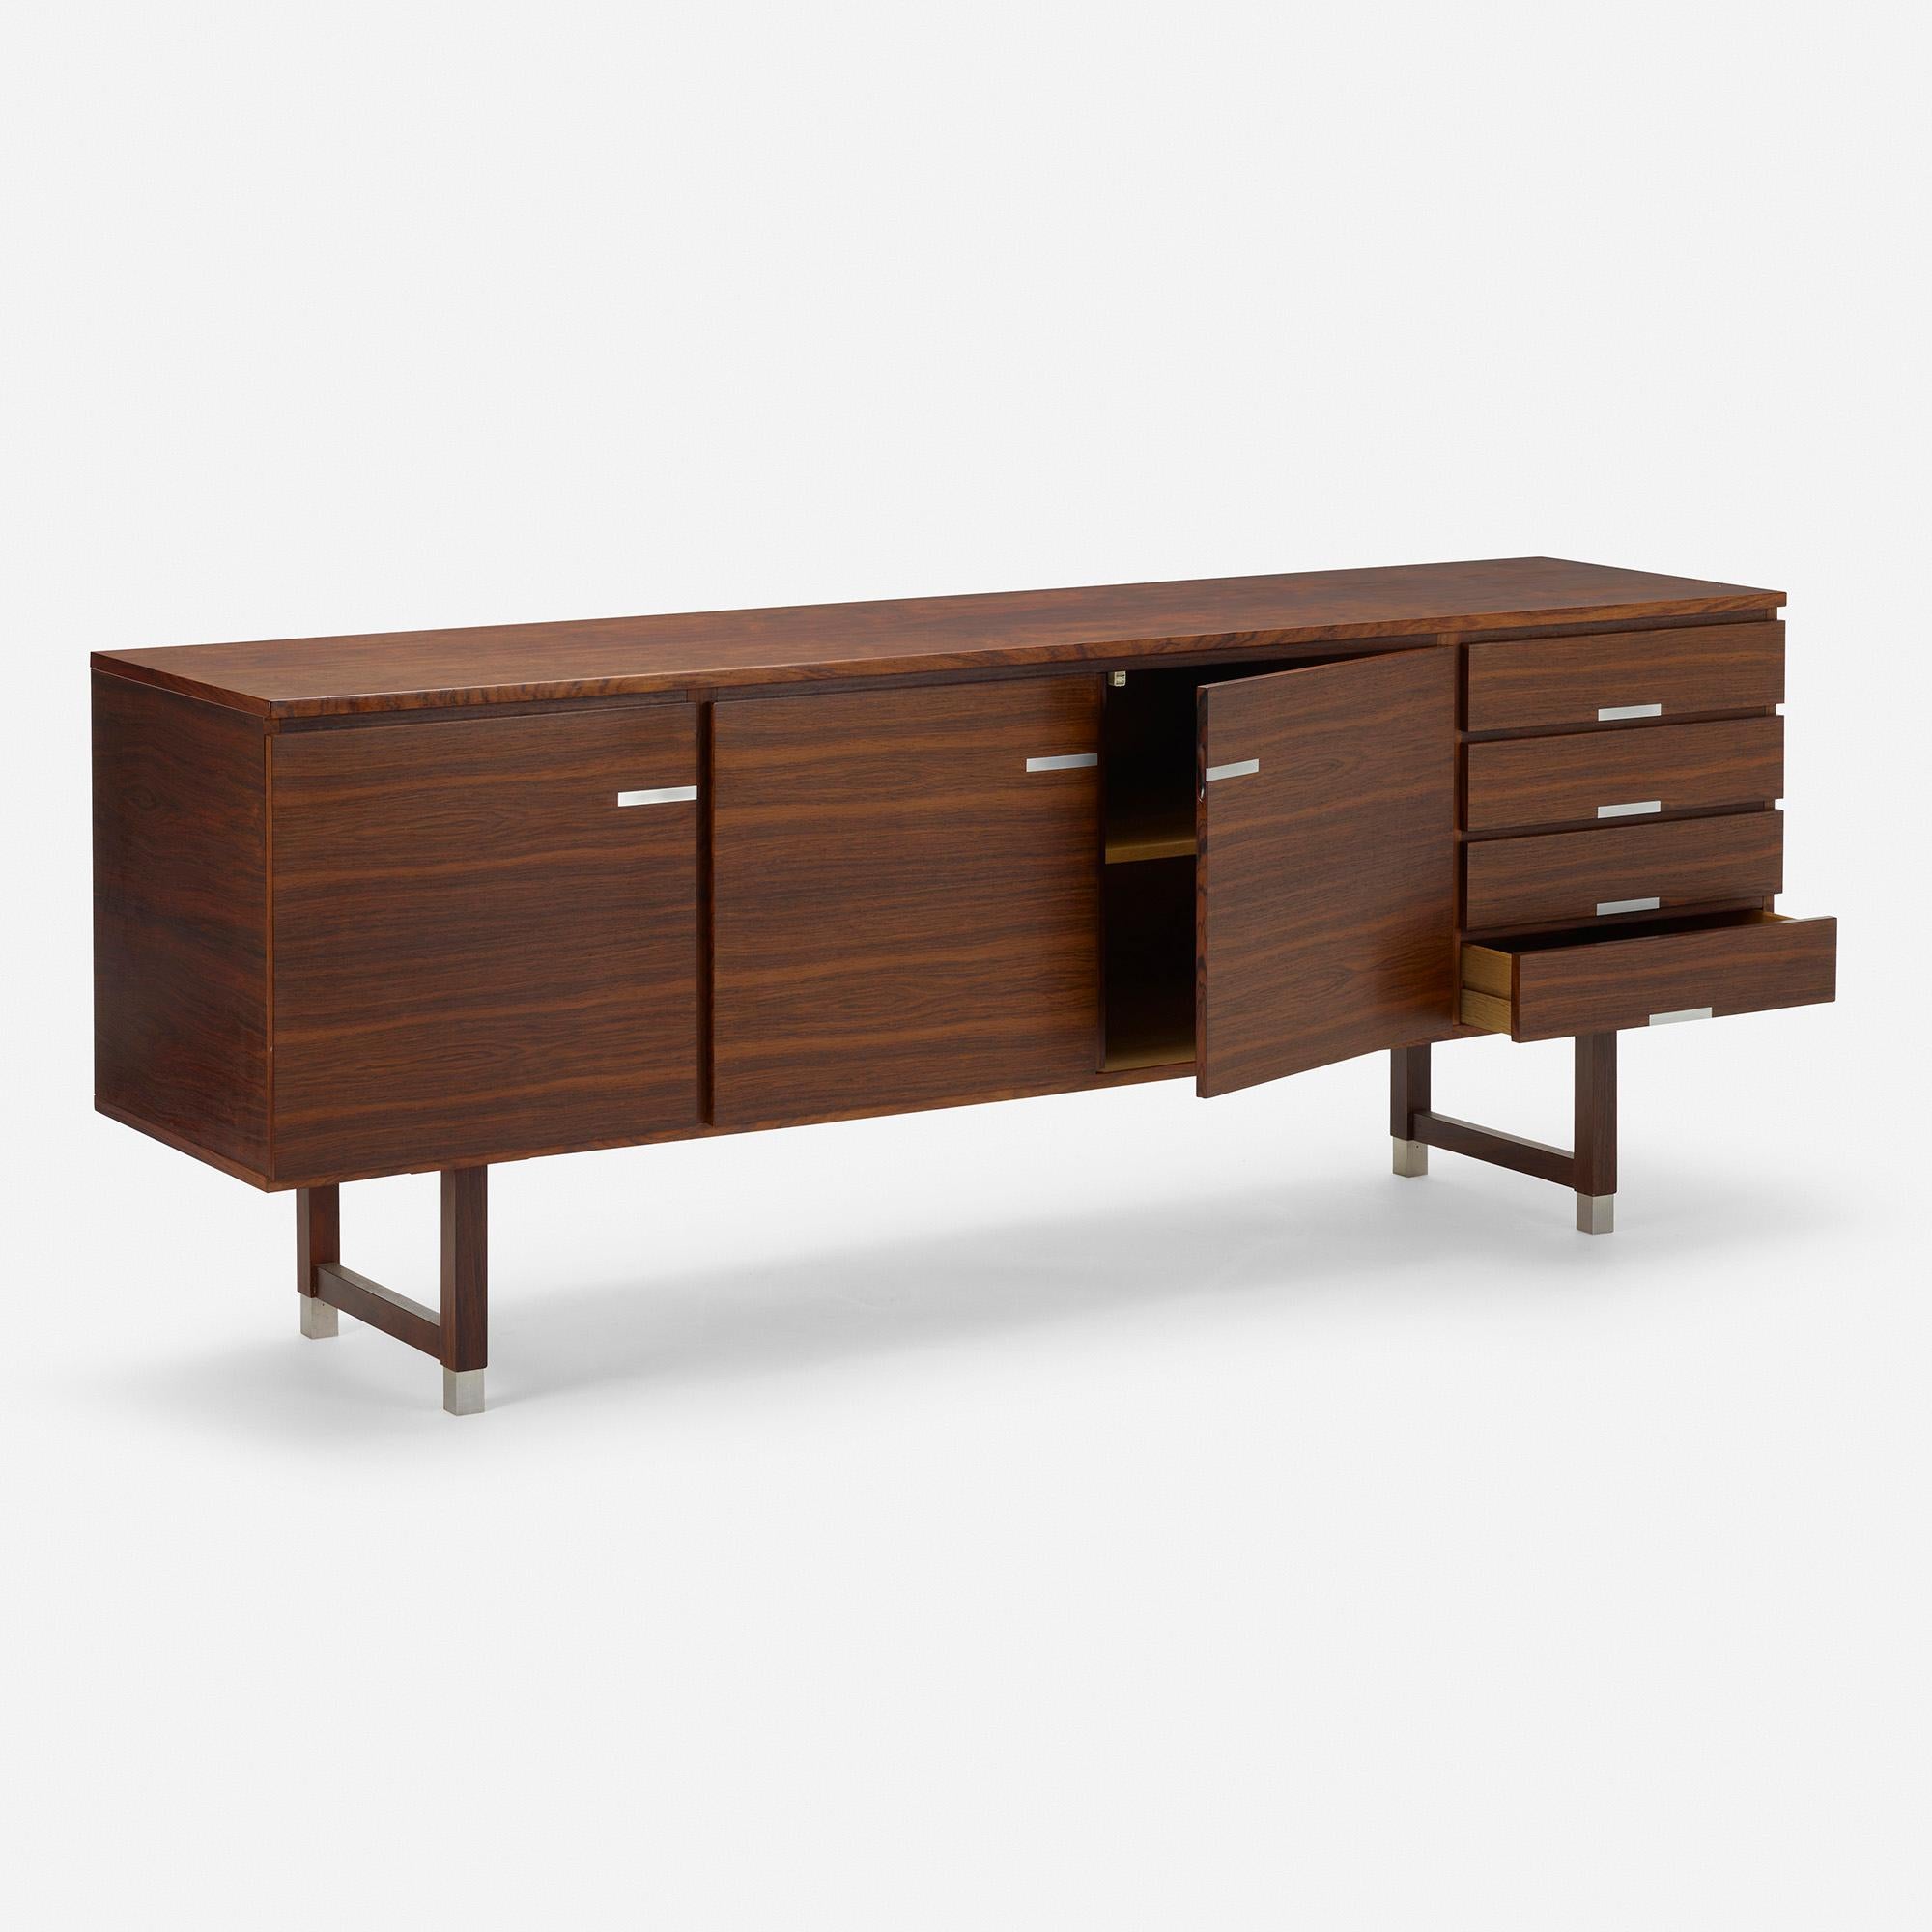 Made in: Denmark, 1958

Material: rosewood, aluminum

Size: 82.75 W × 20 D × 32.5 H in.